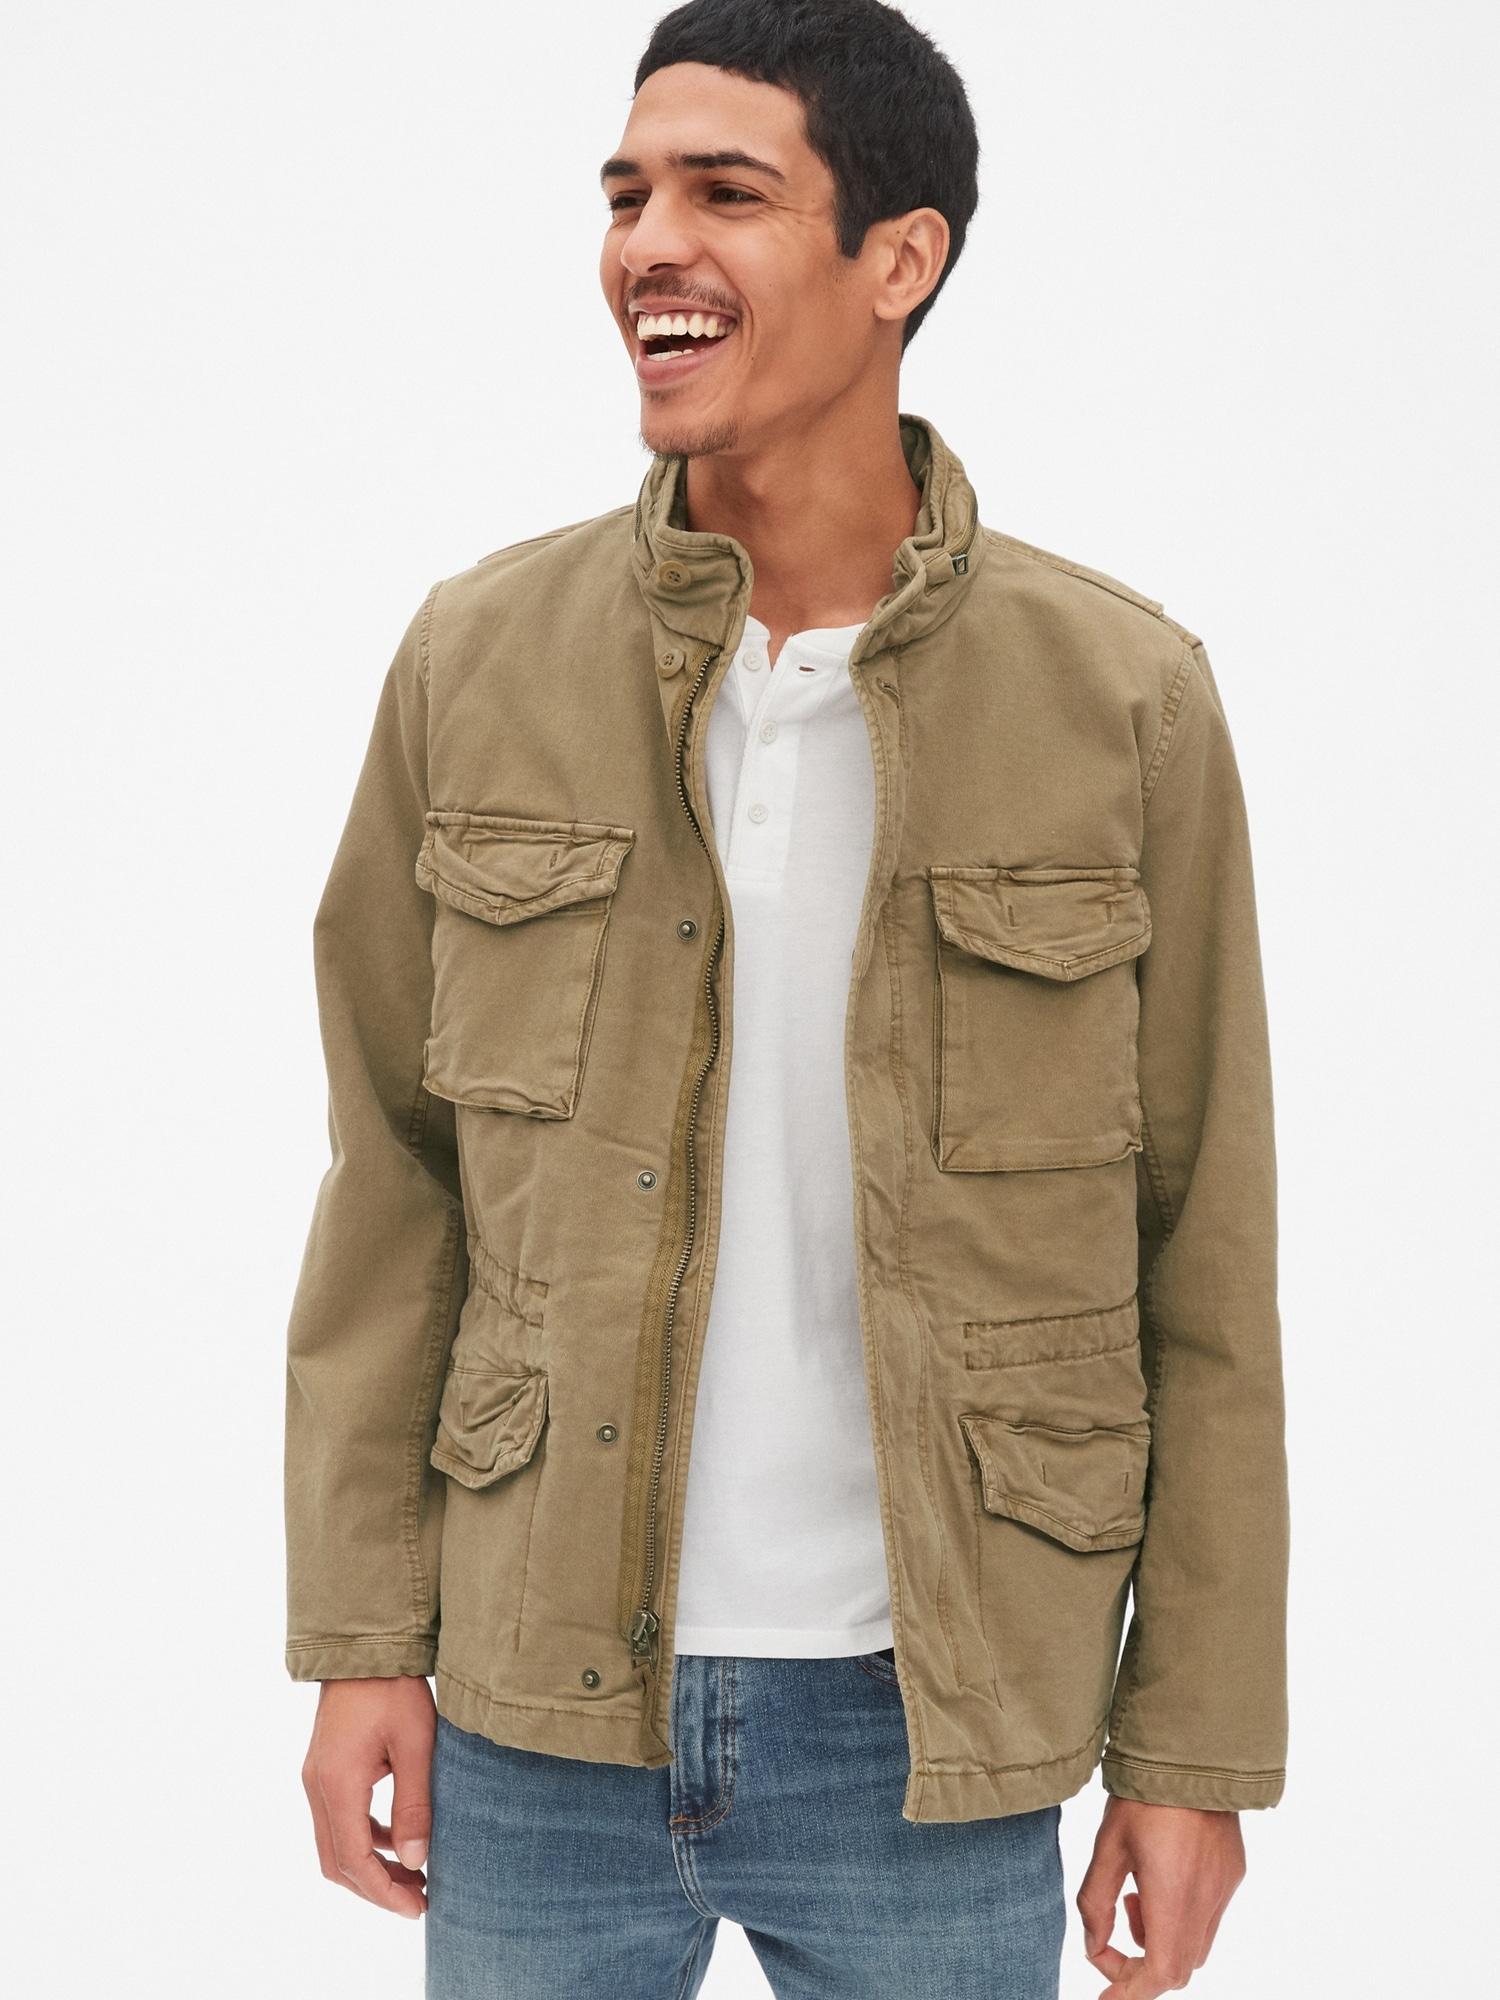 Gap Canvas Military Jacket With Hidden Hood for Men - Lyst